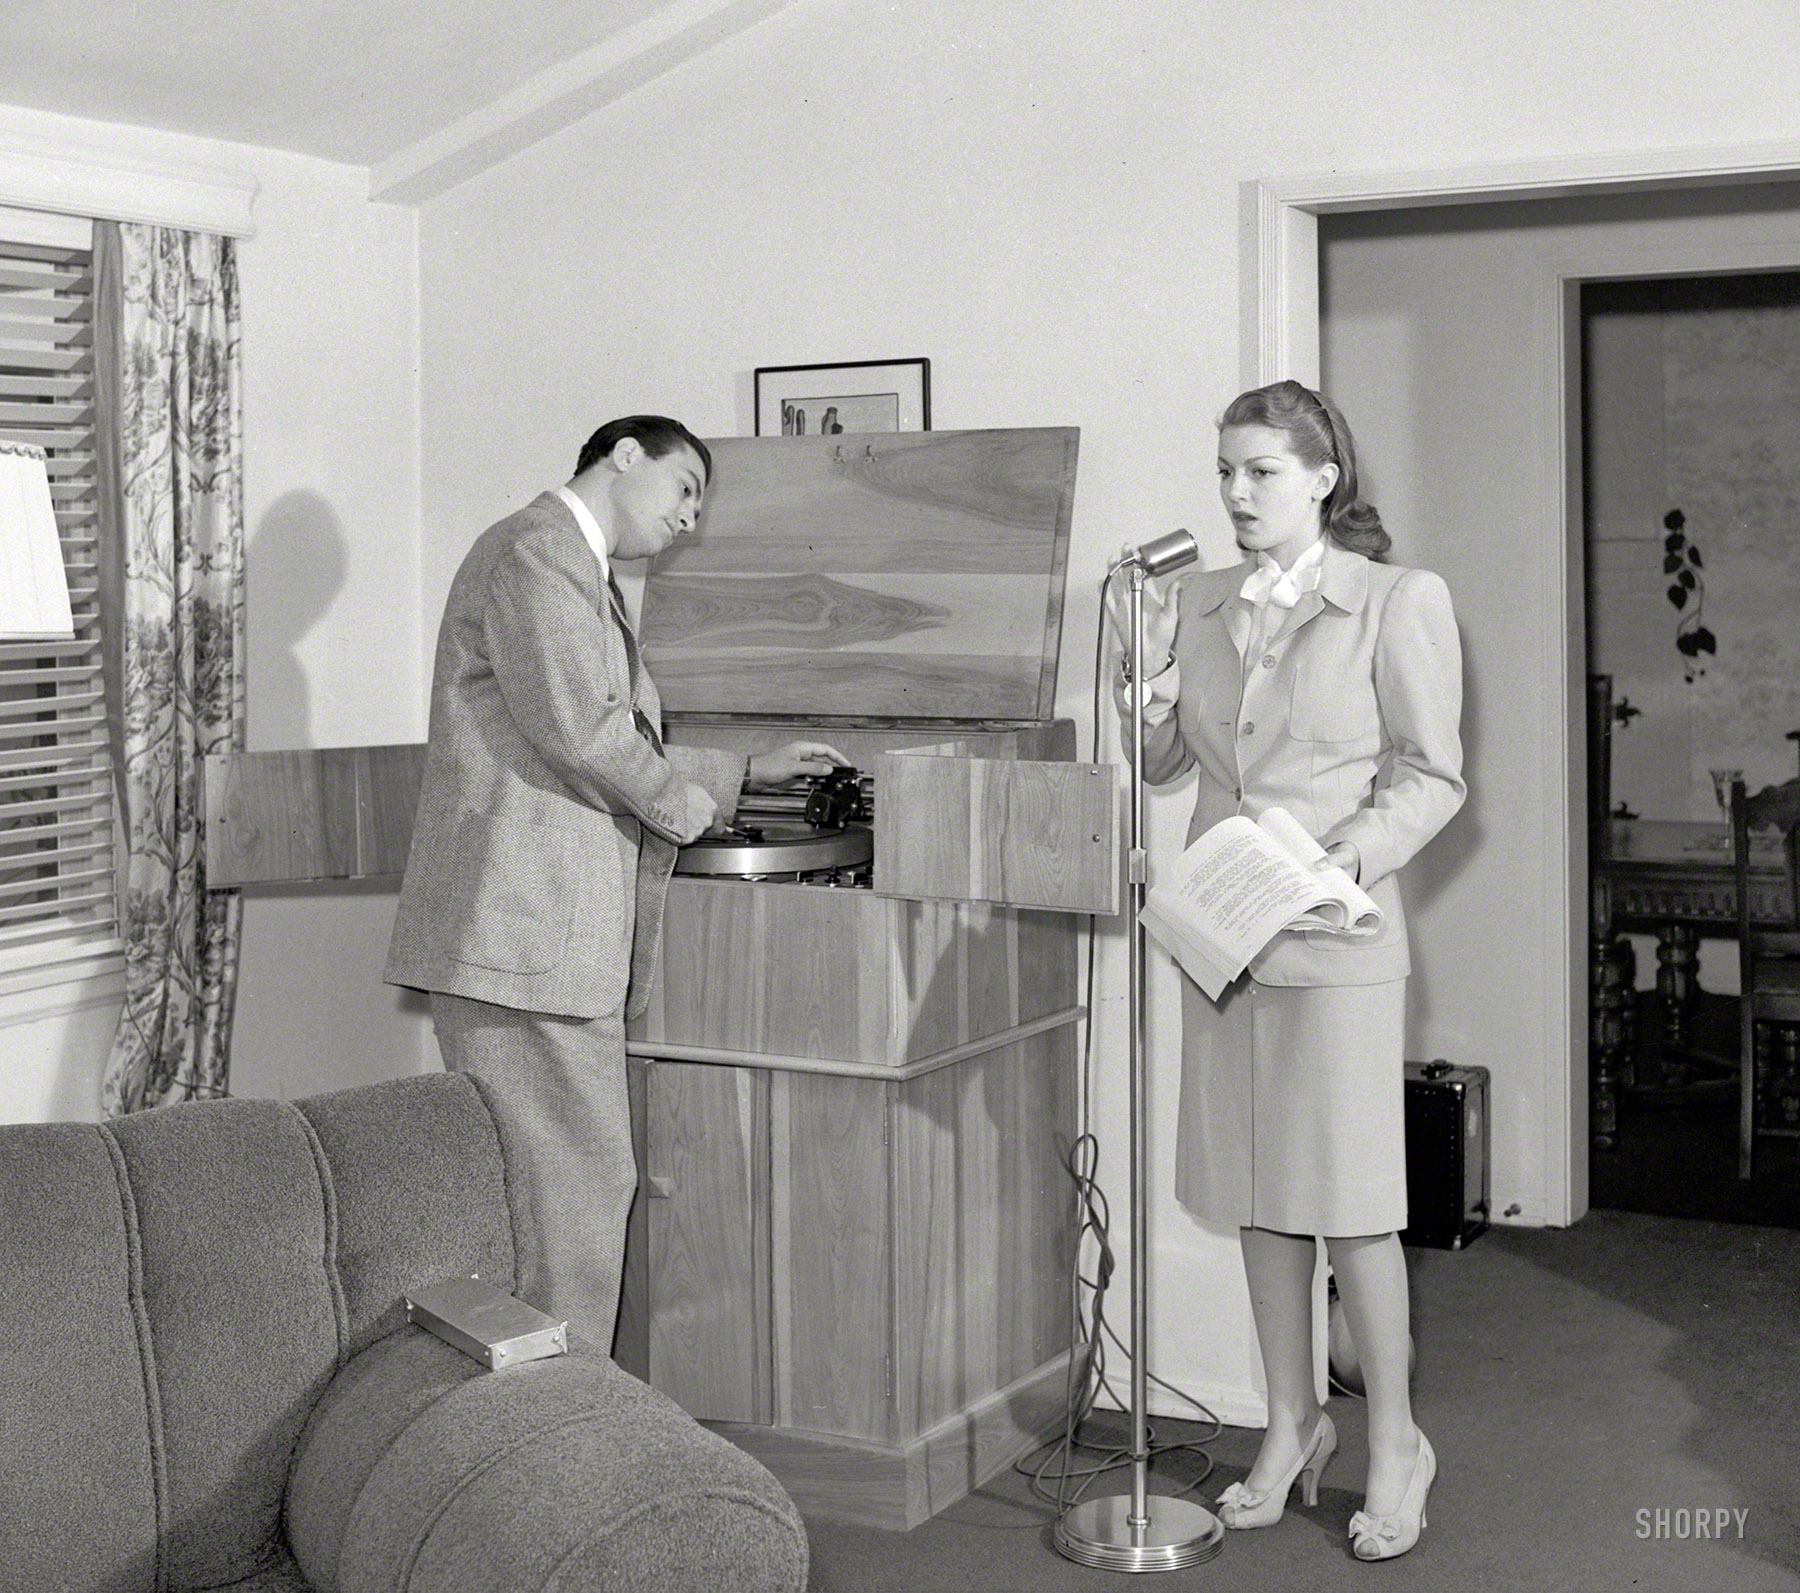 1940. "Lana Turner and Artie Shaw with audio recording system in their Beverly Hills Home." Possibly rehearsing a movie script. Photo by Earl Theisen for the Look magazine article "Lana Turner and Artie Shaw at Home." View full size.